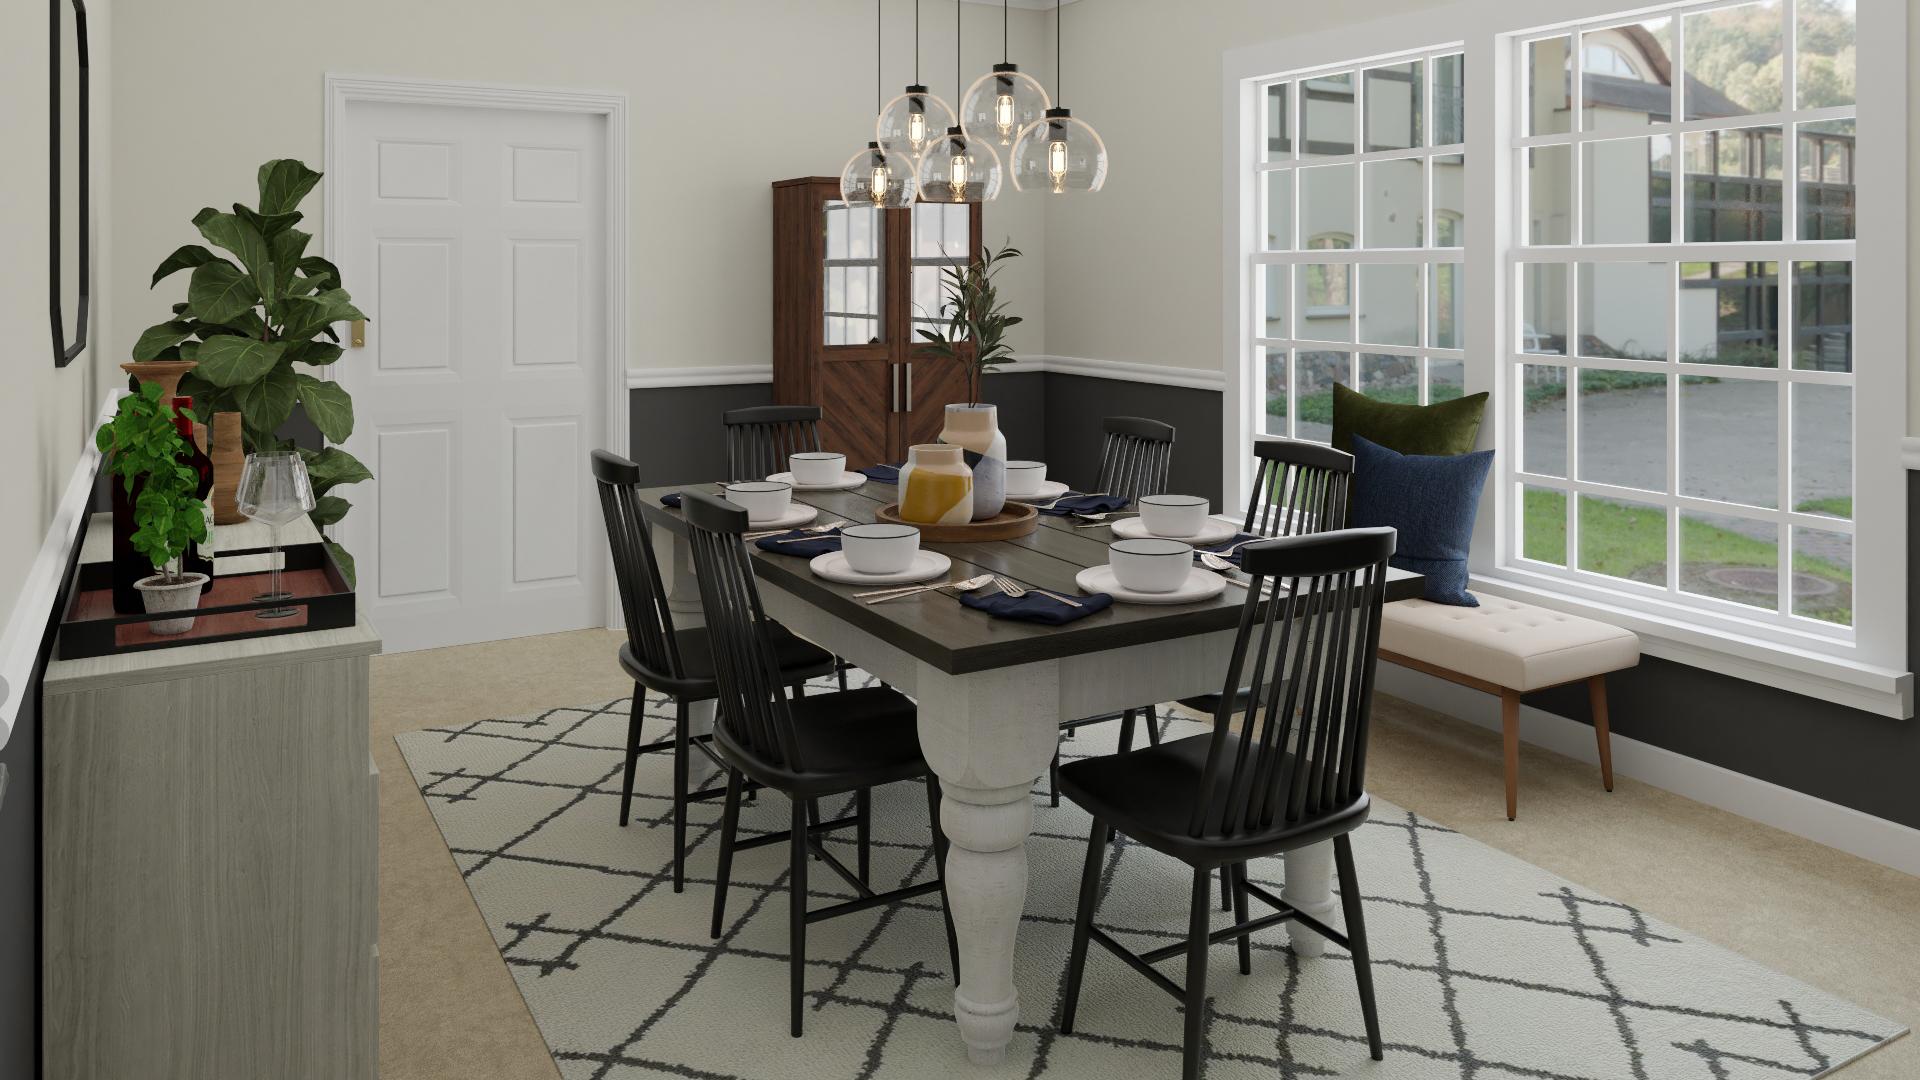 A Farmhouse Dining Room In Onyx - Bleached Tones